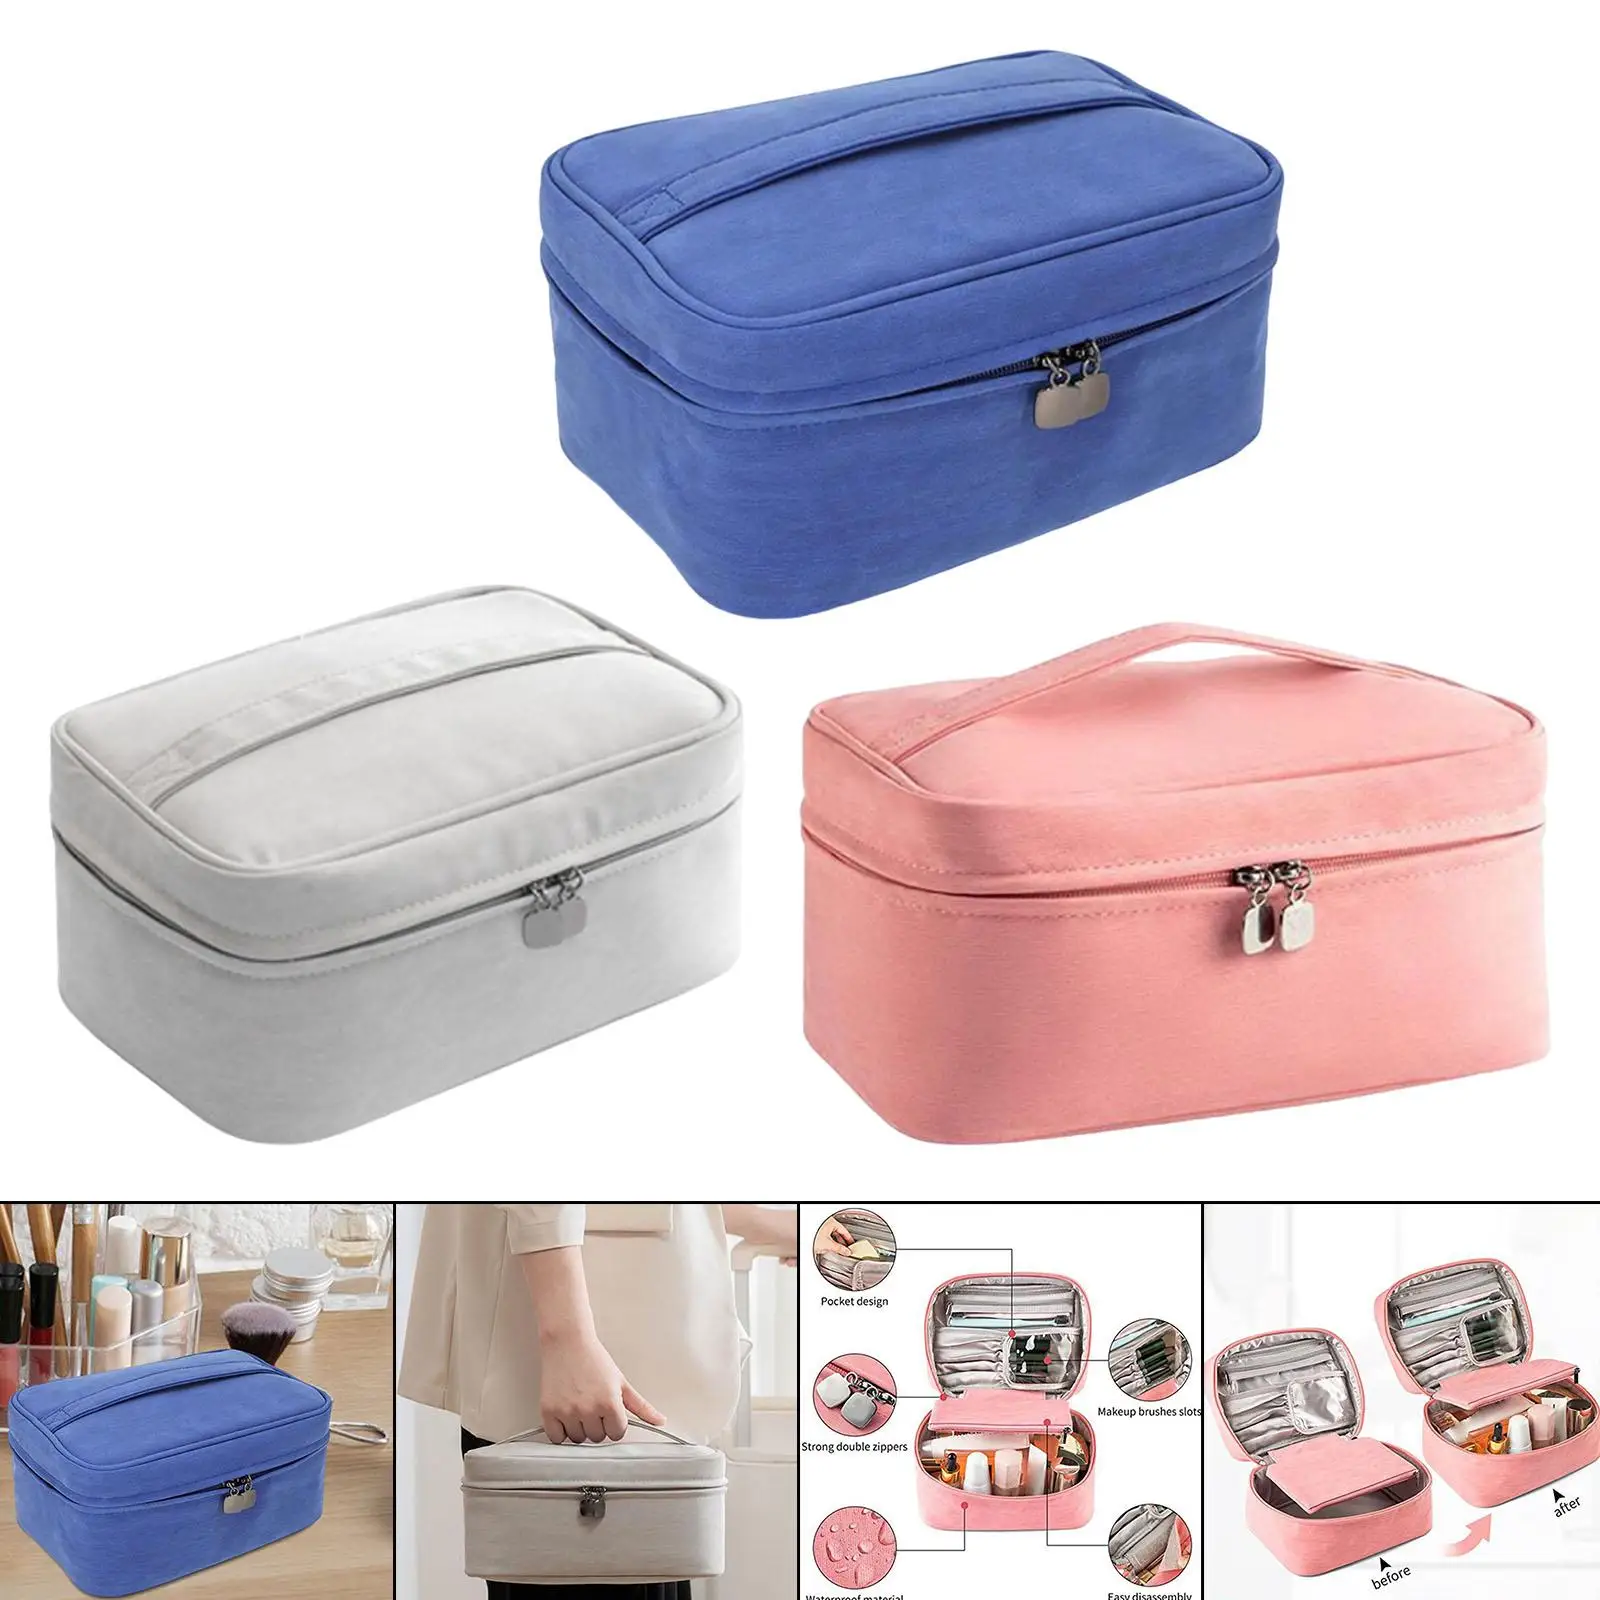 Makeup Organizer Bag with Detachable Pouch with Brush Holder Pouch Multifunctional Cosmetic Case for Eyebrow Pencil Eye Shadow